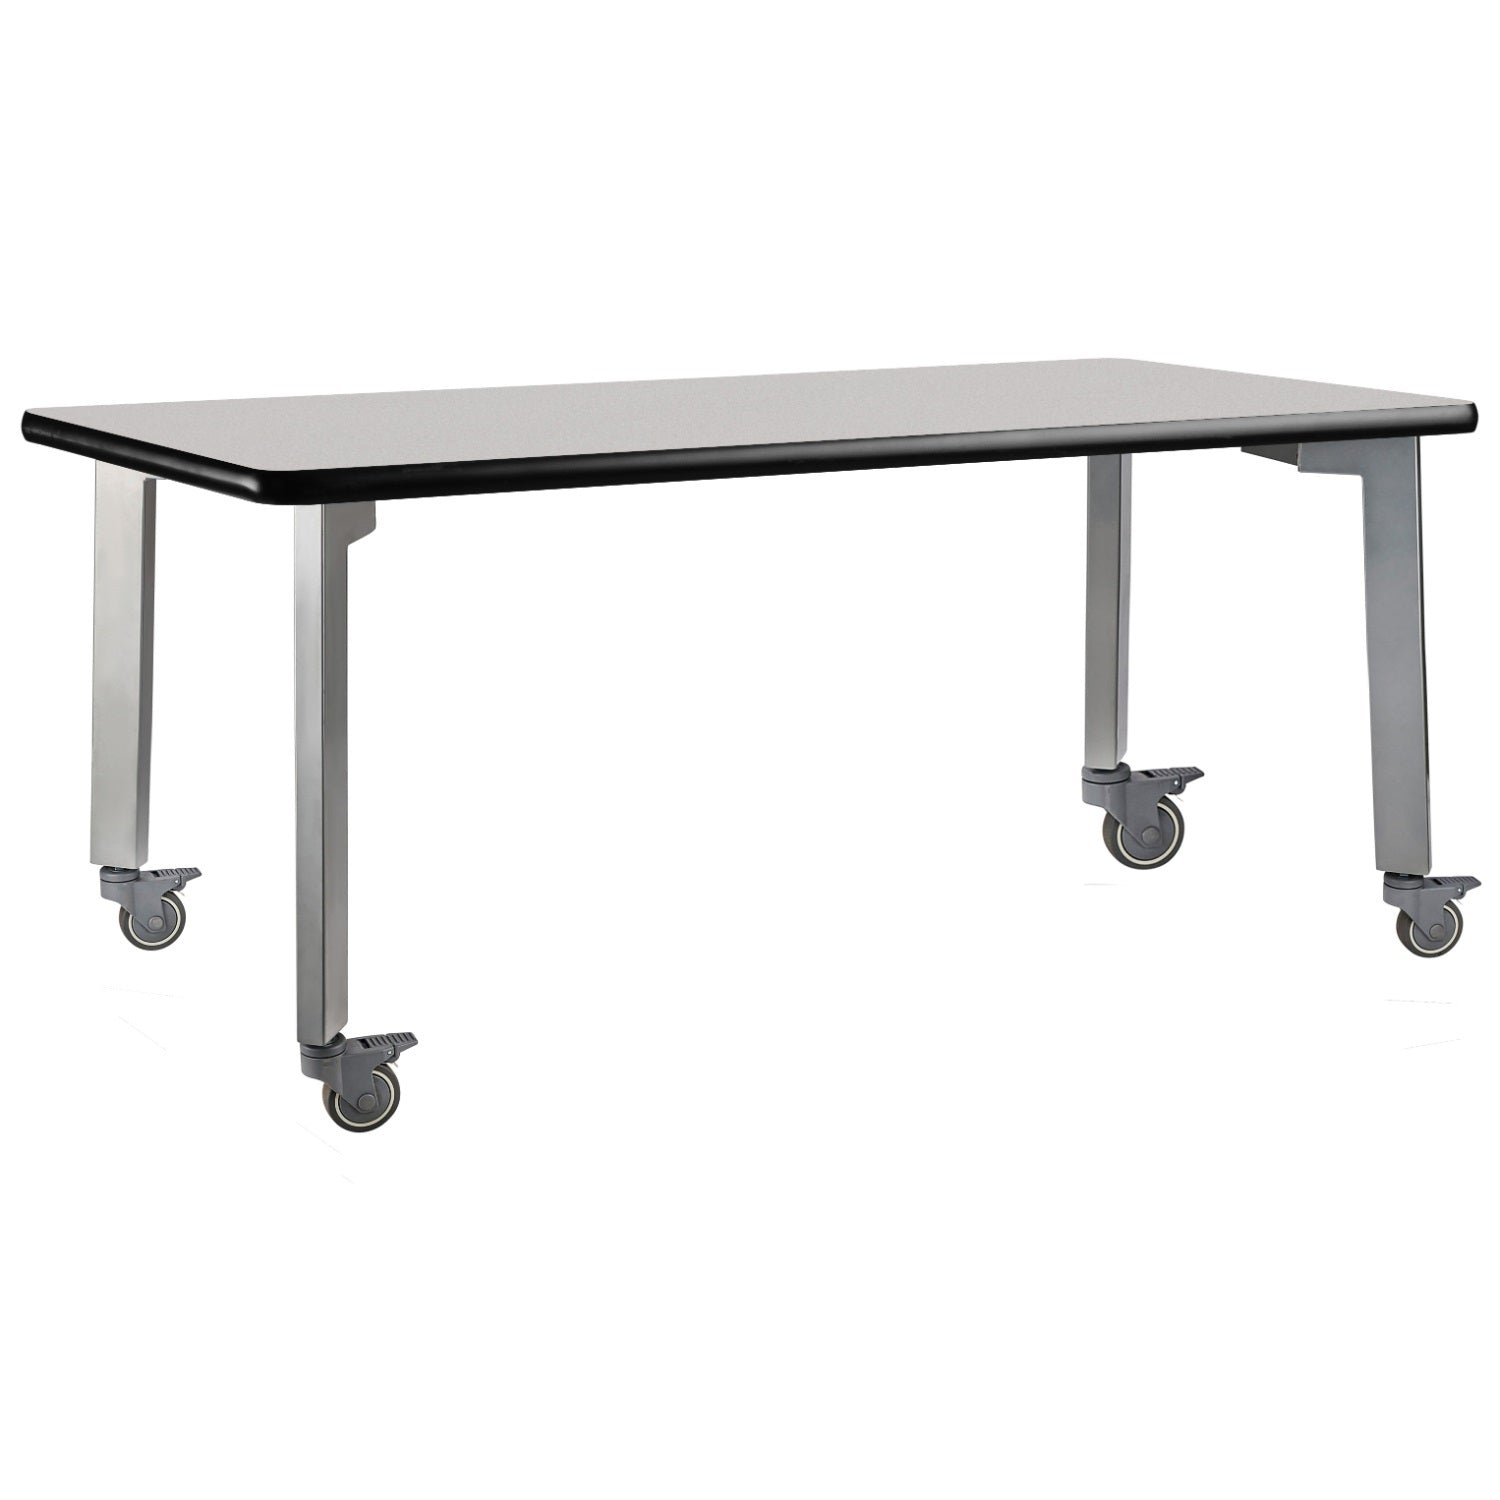 Titan Mobile Table, 36" x 42", Supreme High Pressure Laminate Top with MDF Core and ProtectEdge